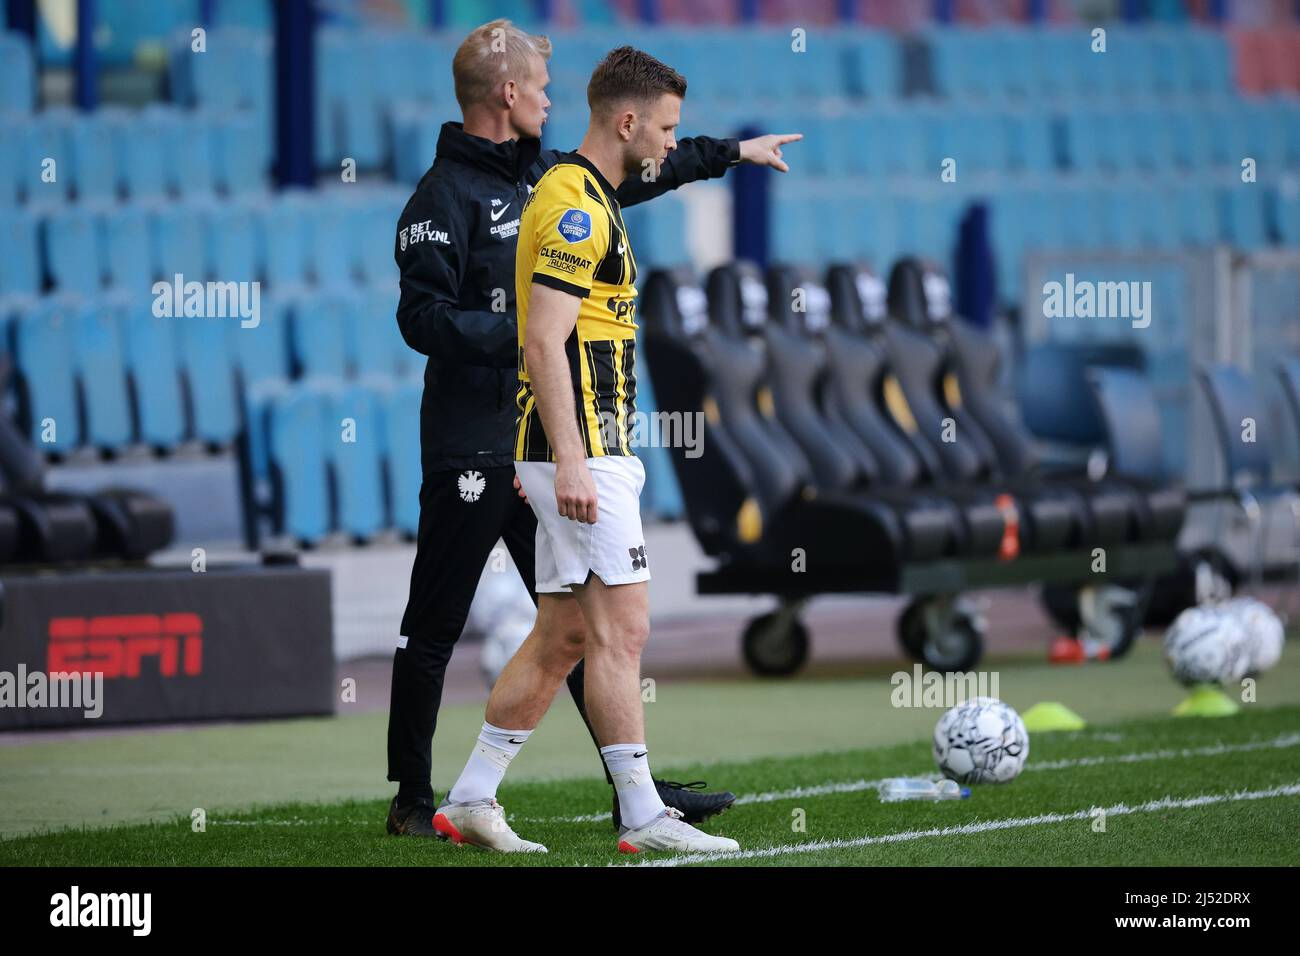 Arnhem, Netherlands. Vitesse, April 19, 2022, ARNHEM - Sondre Tronstad of Vitesse during the Dutch Eredivisie match between Vitesse and Sparta Rotterdam at the Gelredome on April 19, 2022 in Arnhem, Netherlands. Vitesse - Sparta was suspended in injury time on March 4 after misconduct by the home crowd. ANP JEROEN PUTMANS Stock Photo